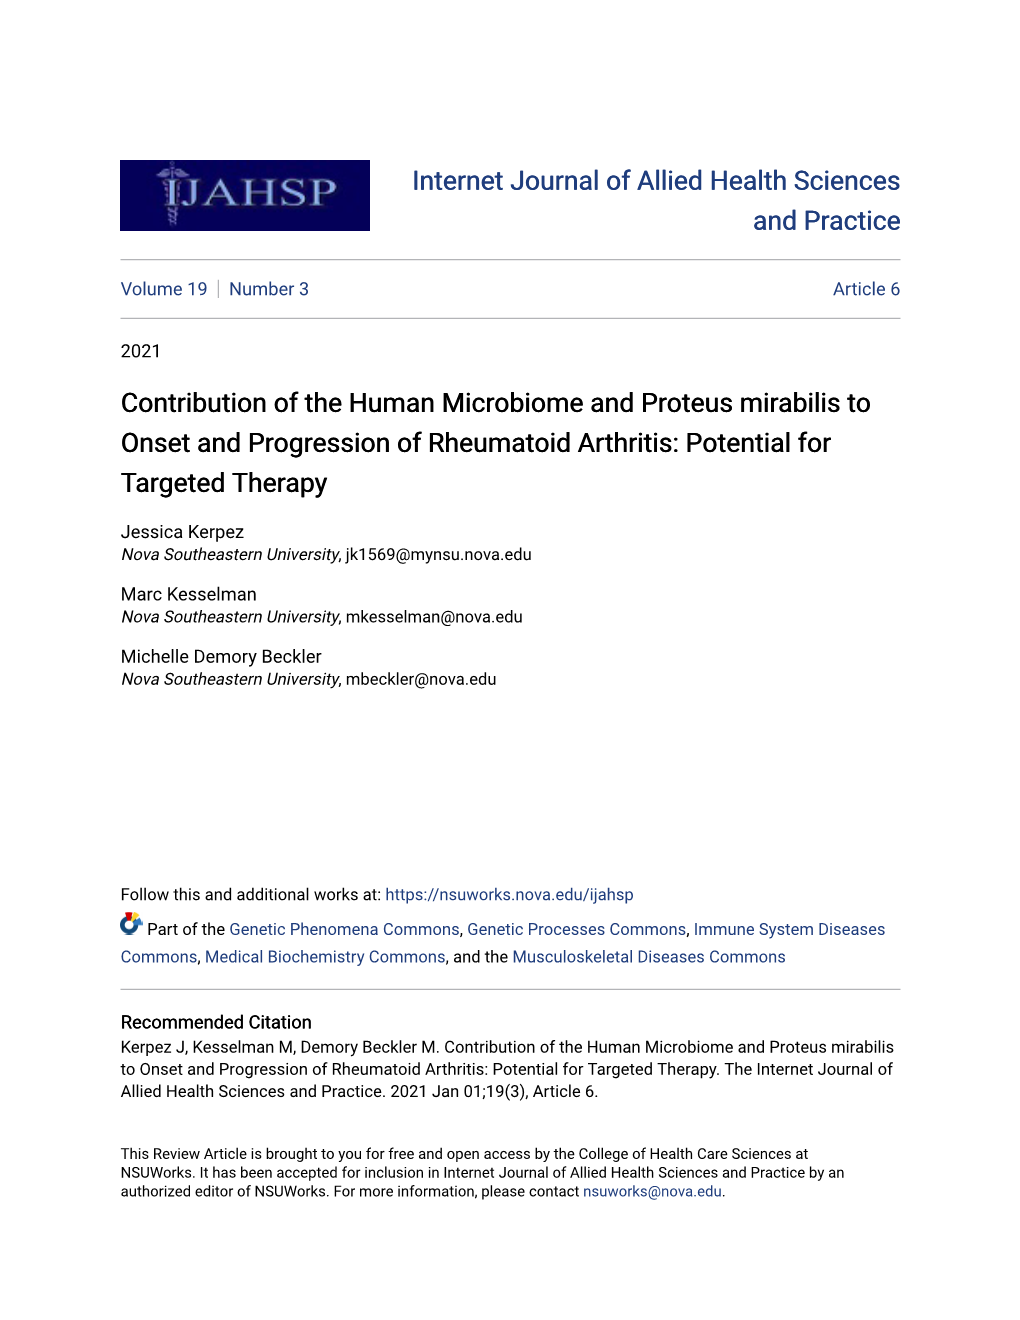 Contribution of the Human Microbiome and Proteus Mirabilis to Onset and Progression of Rheumatoid Arthritis: Potential for Targeted Therapy